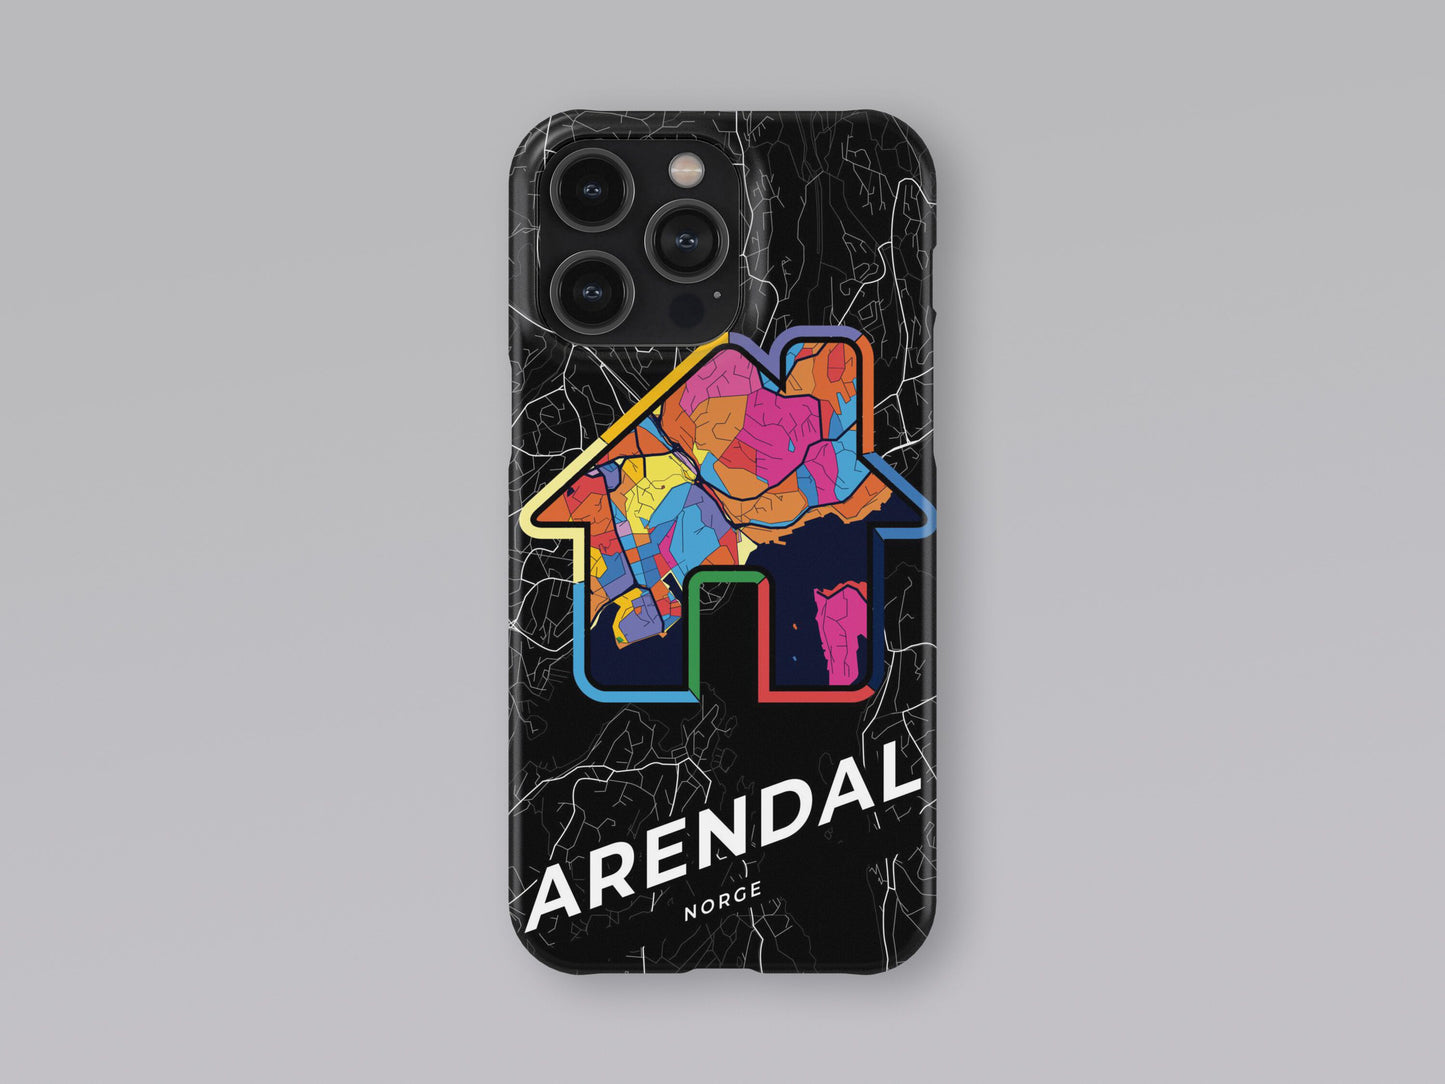 Arendal Norway slim phone case with colorful icon. Birthday, wedding or housewarming gift. Couple match cases. 3